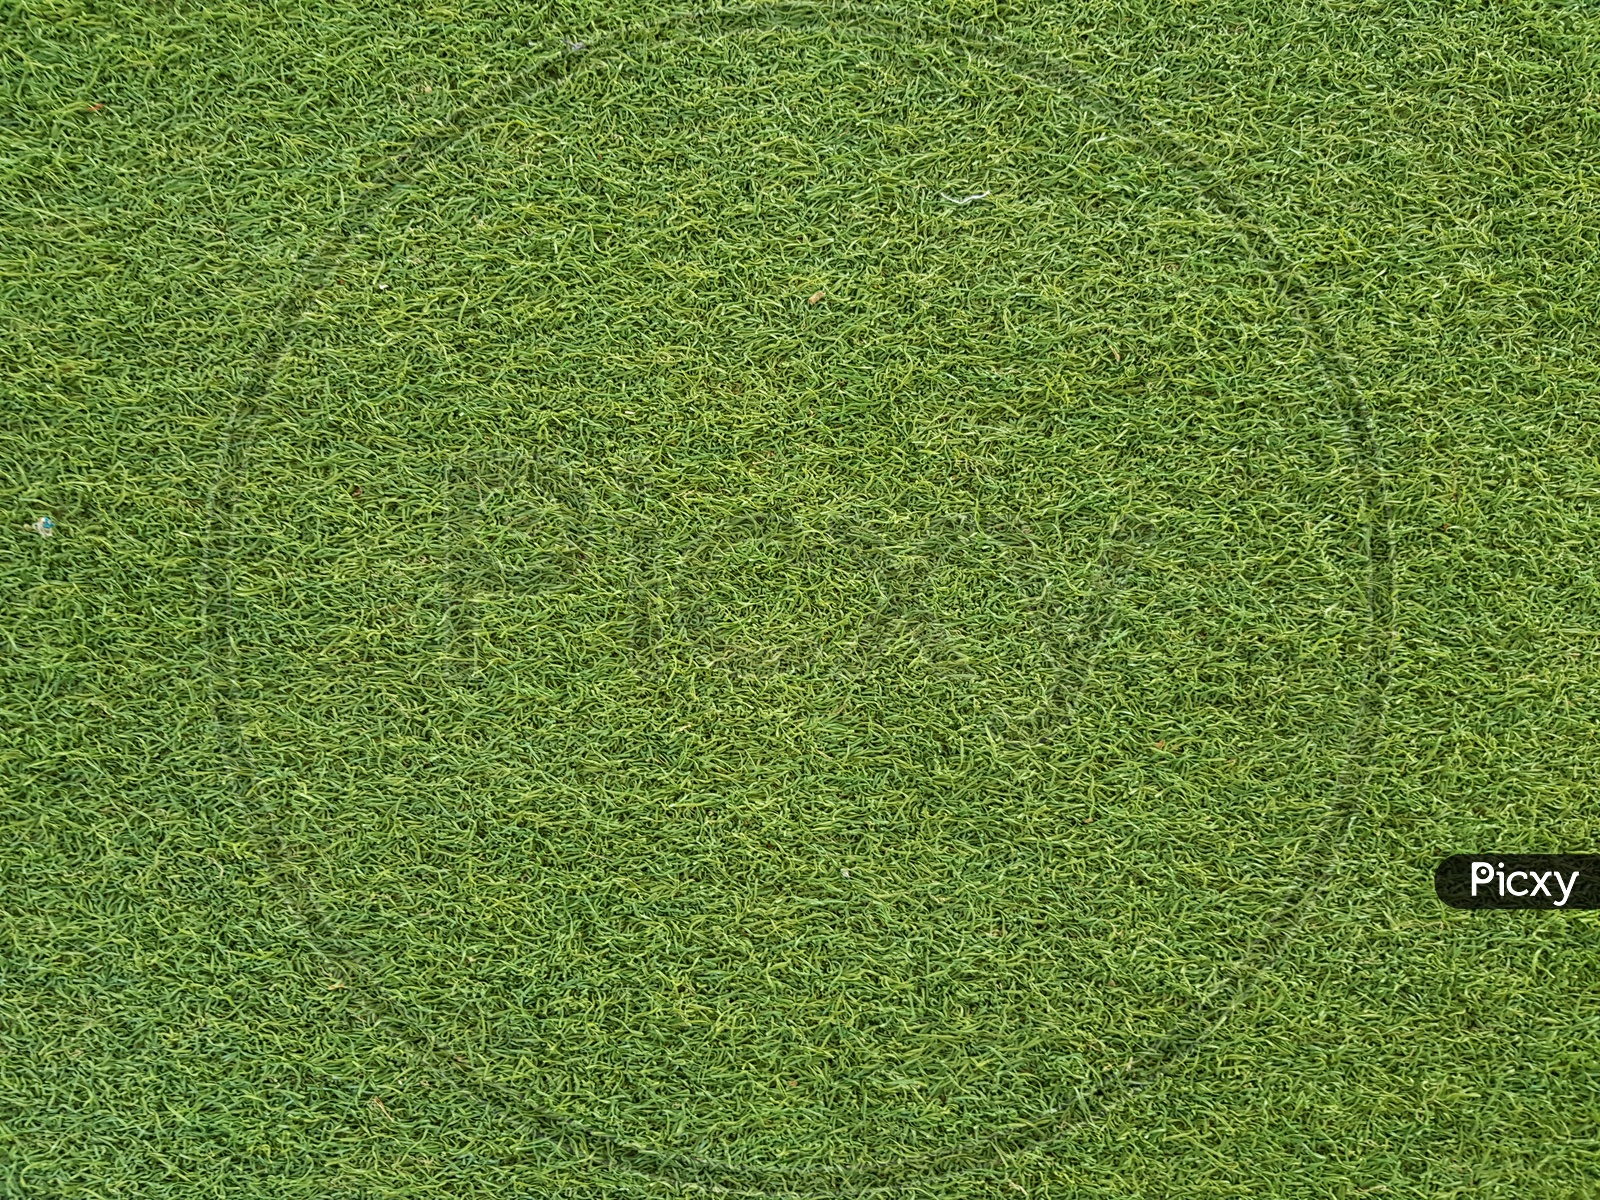 Green Lawn Grass With Texture Forming a Background